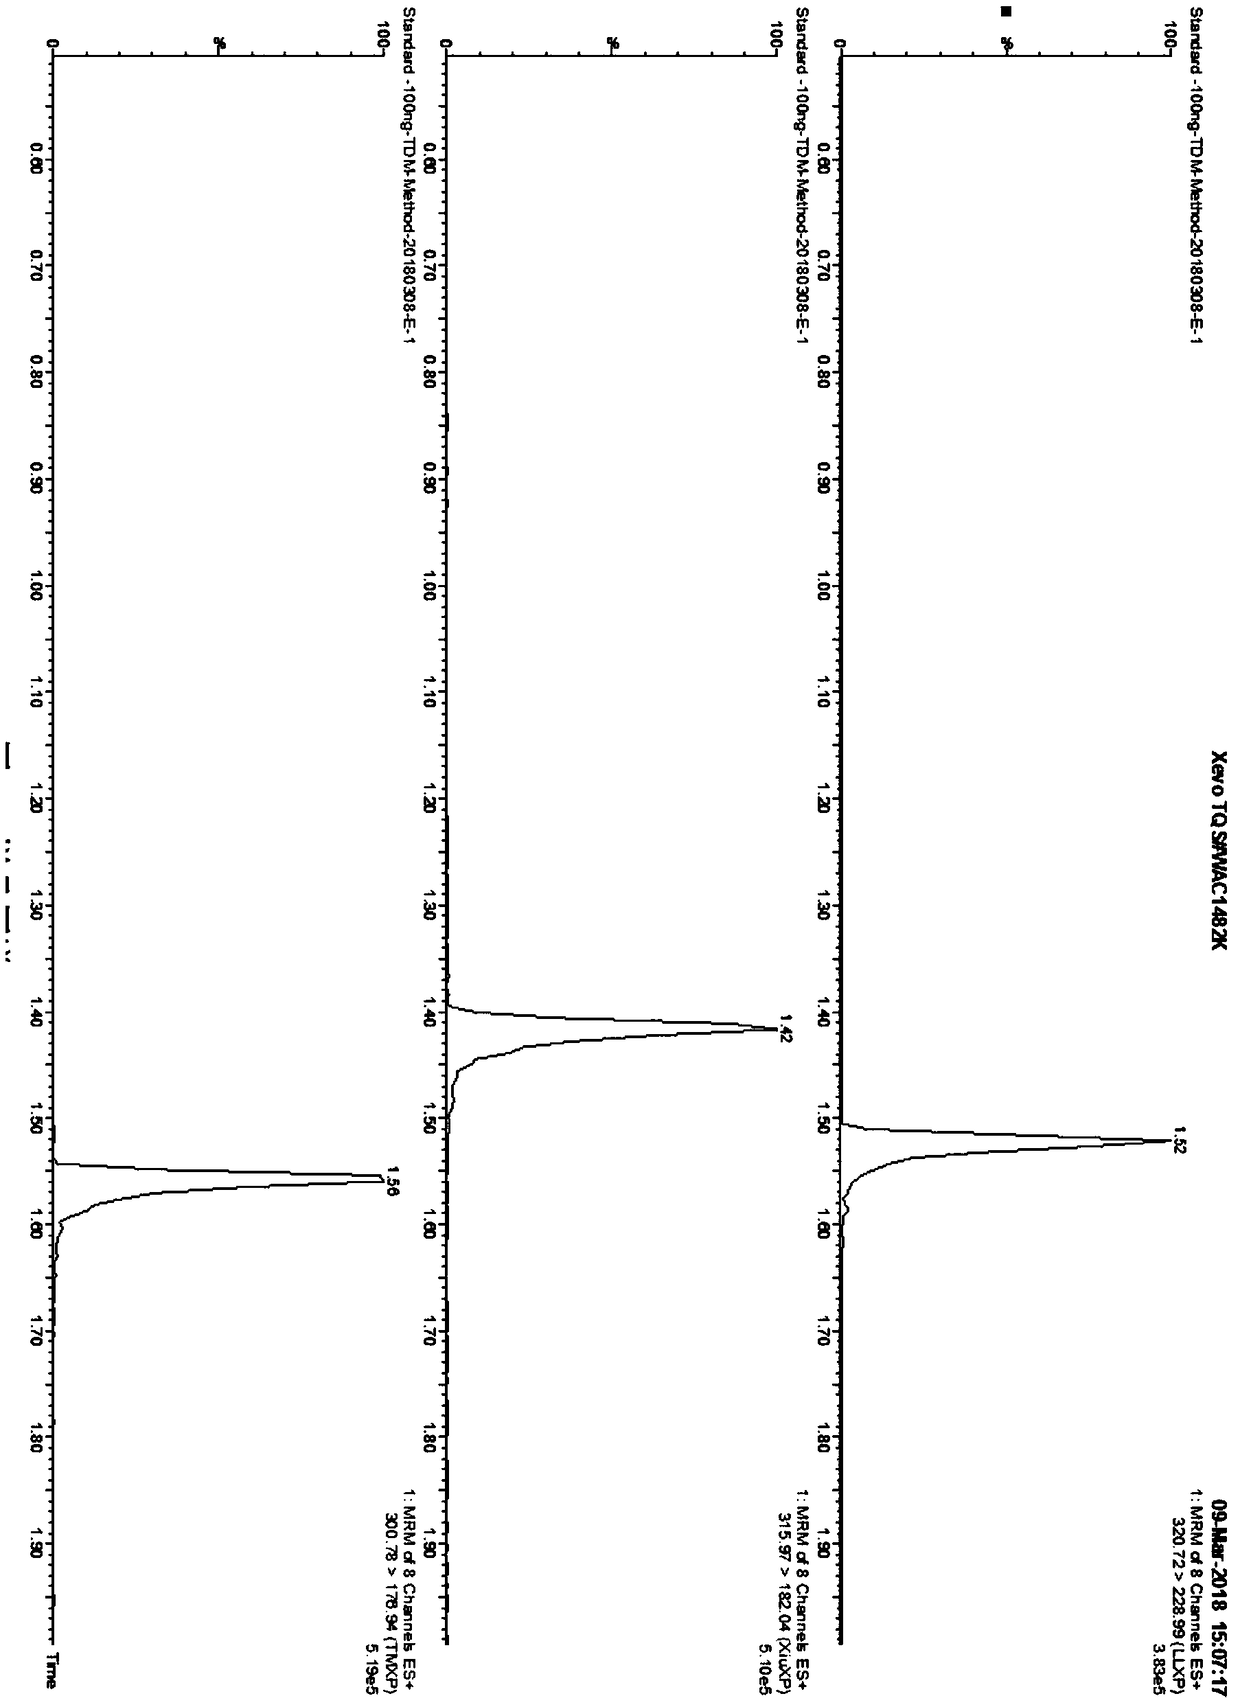 Kit for determining antianxiety/hypnotic type drugs in serum and plasma through liquid chromatography tandem mass spectrometry and application thereof